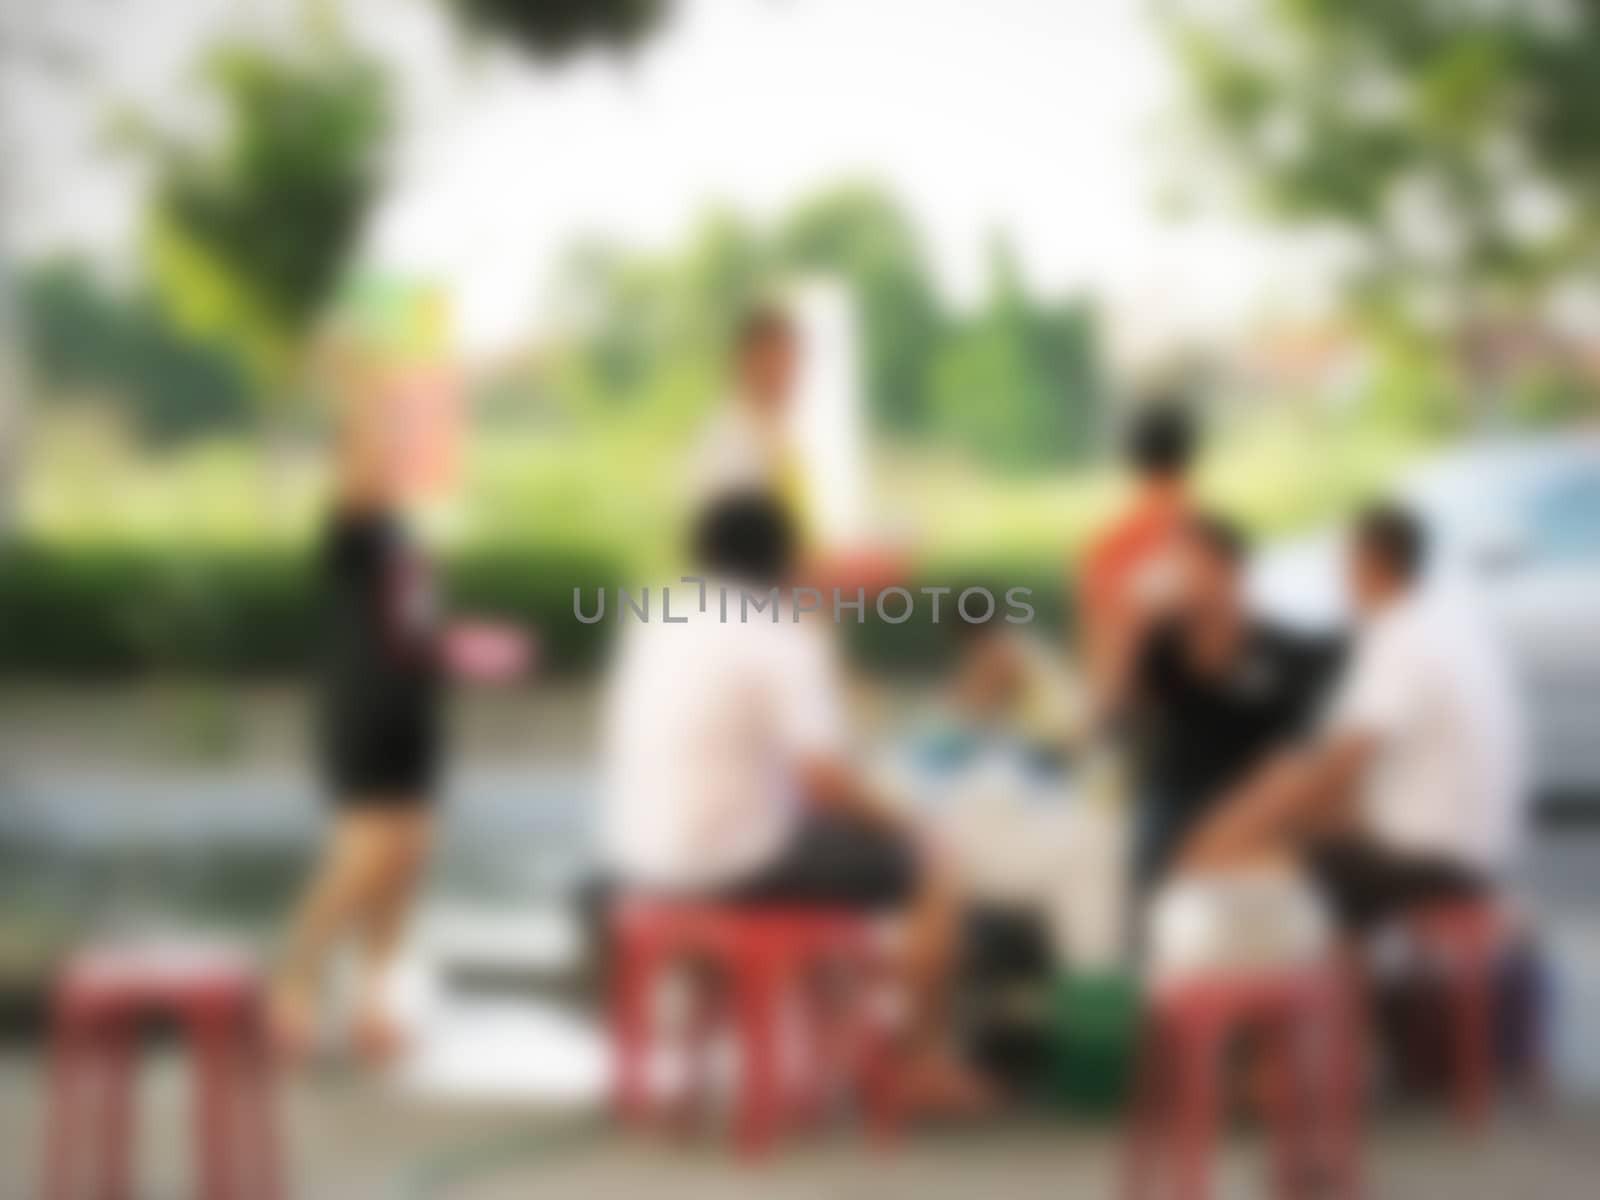 defocused of people sitting on red chair waiting for something